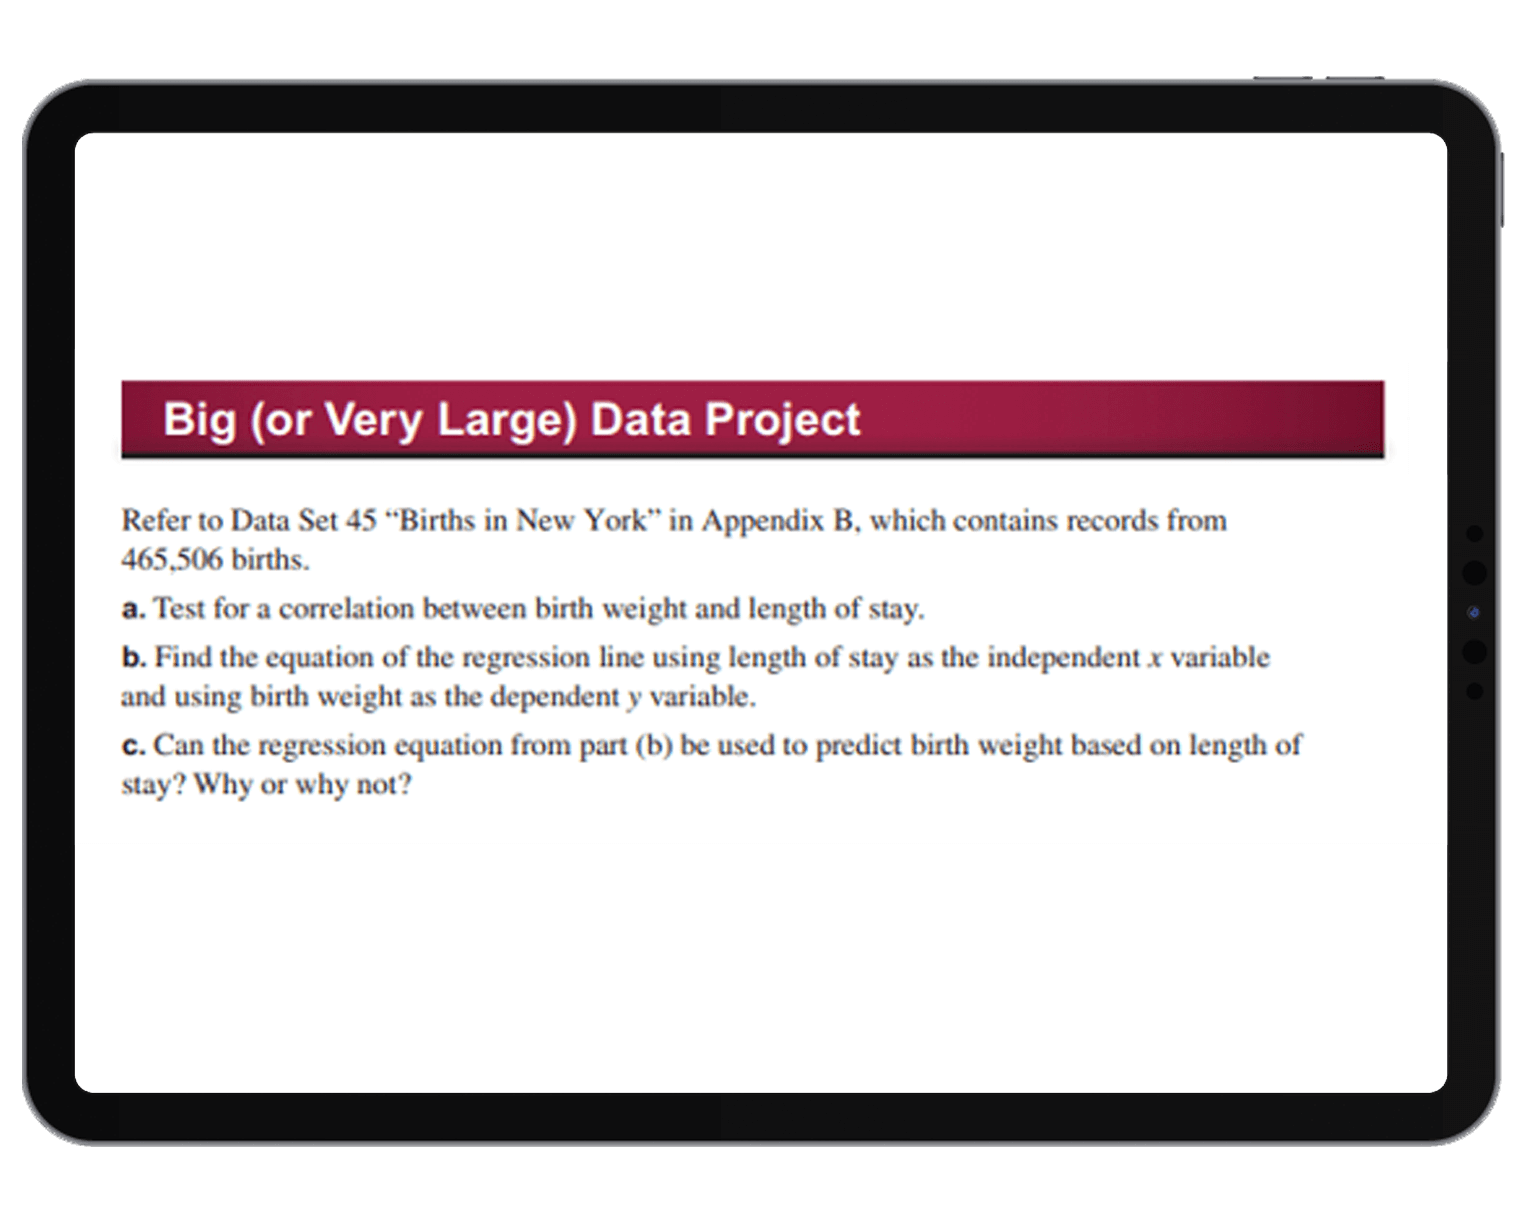 Big (or Very Large) Data Project example image